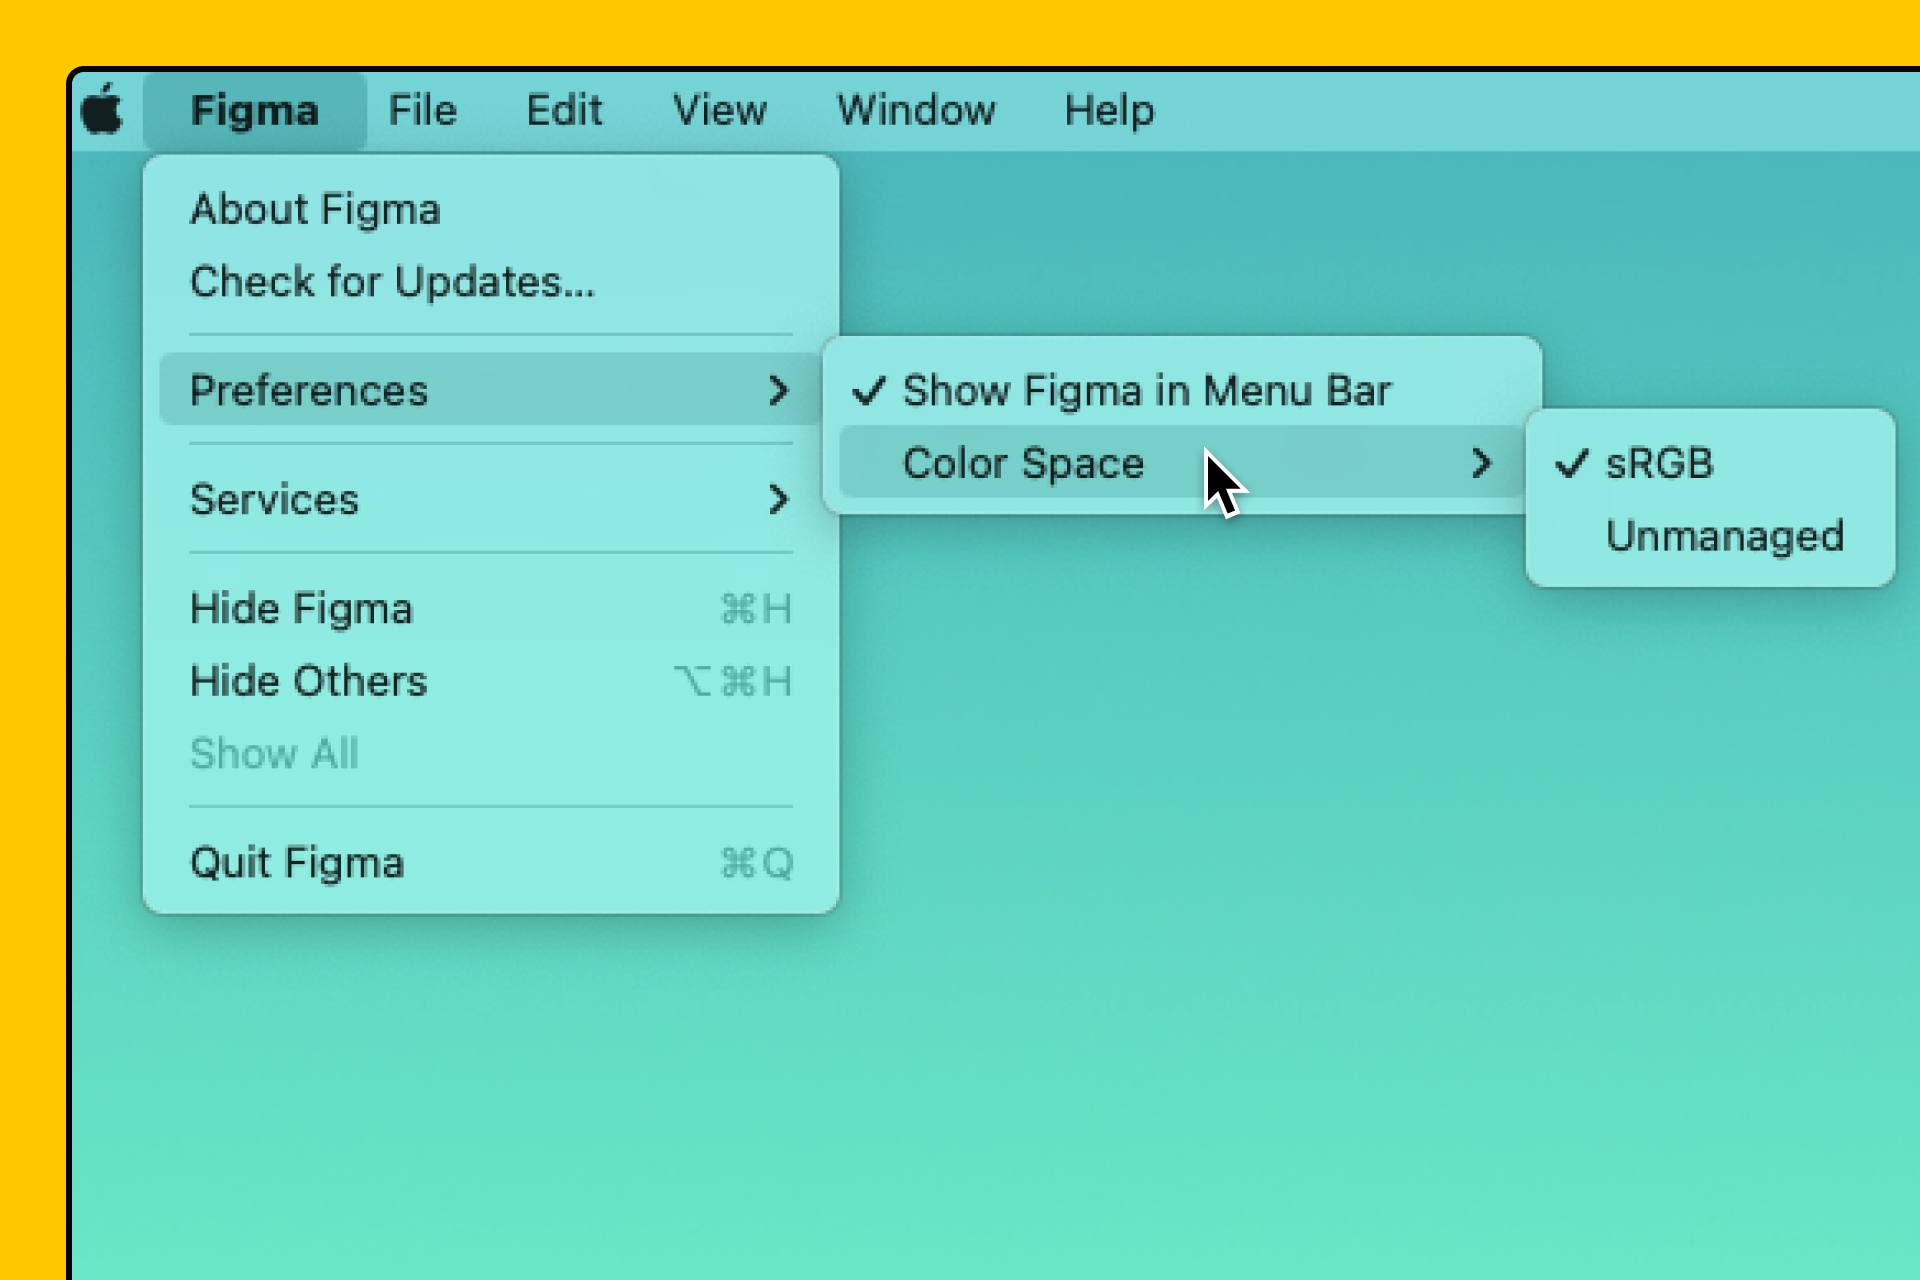 The Figma dropdown menu is selected from the top left corner of a Macbook.